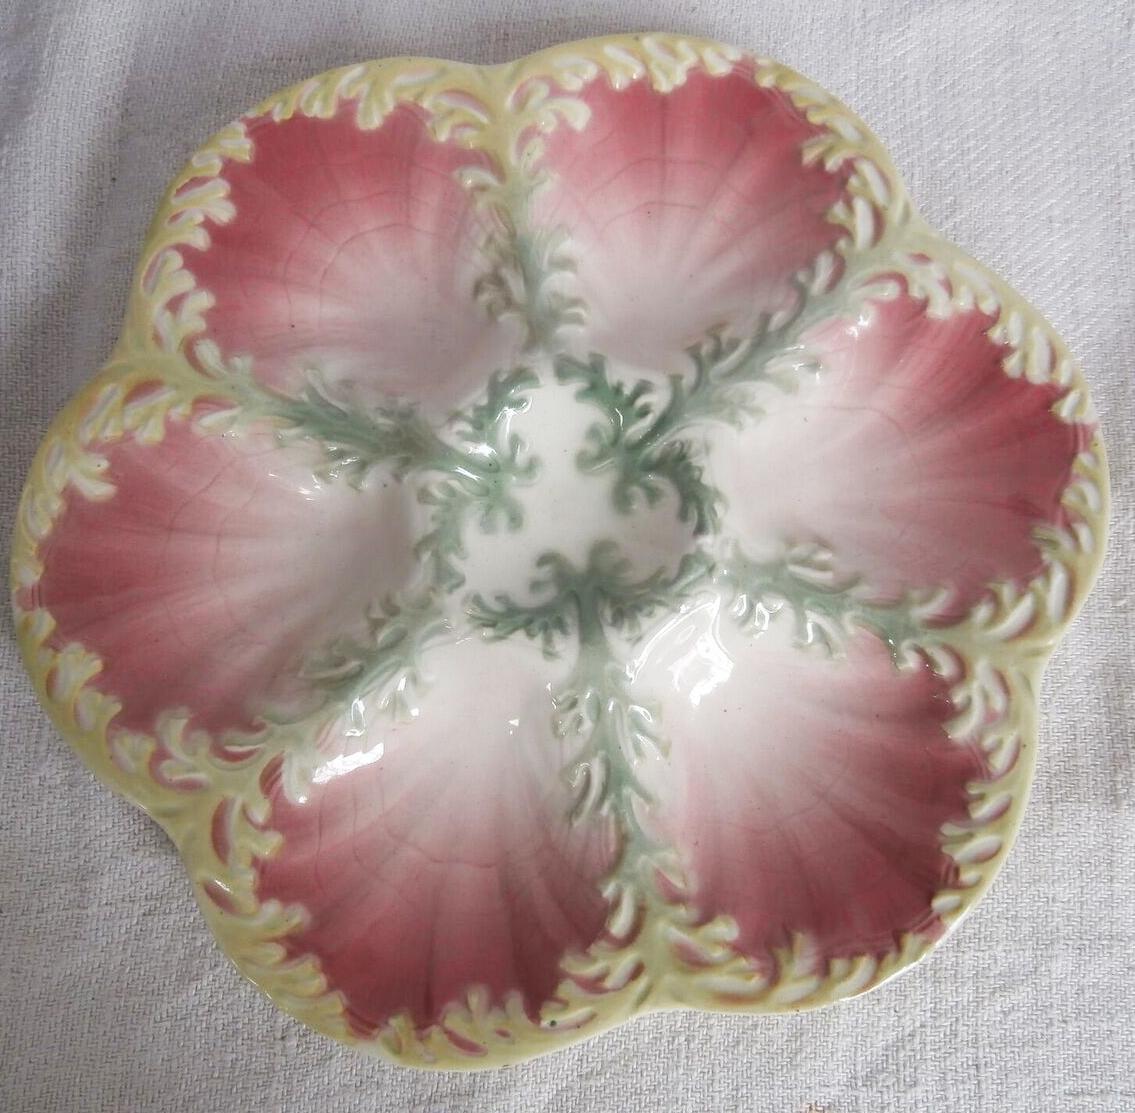 Early 20th Century Majolica Seaweeds Oyster Plate Keller et Guerin Saint Clement